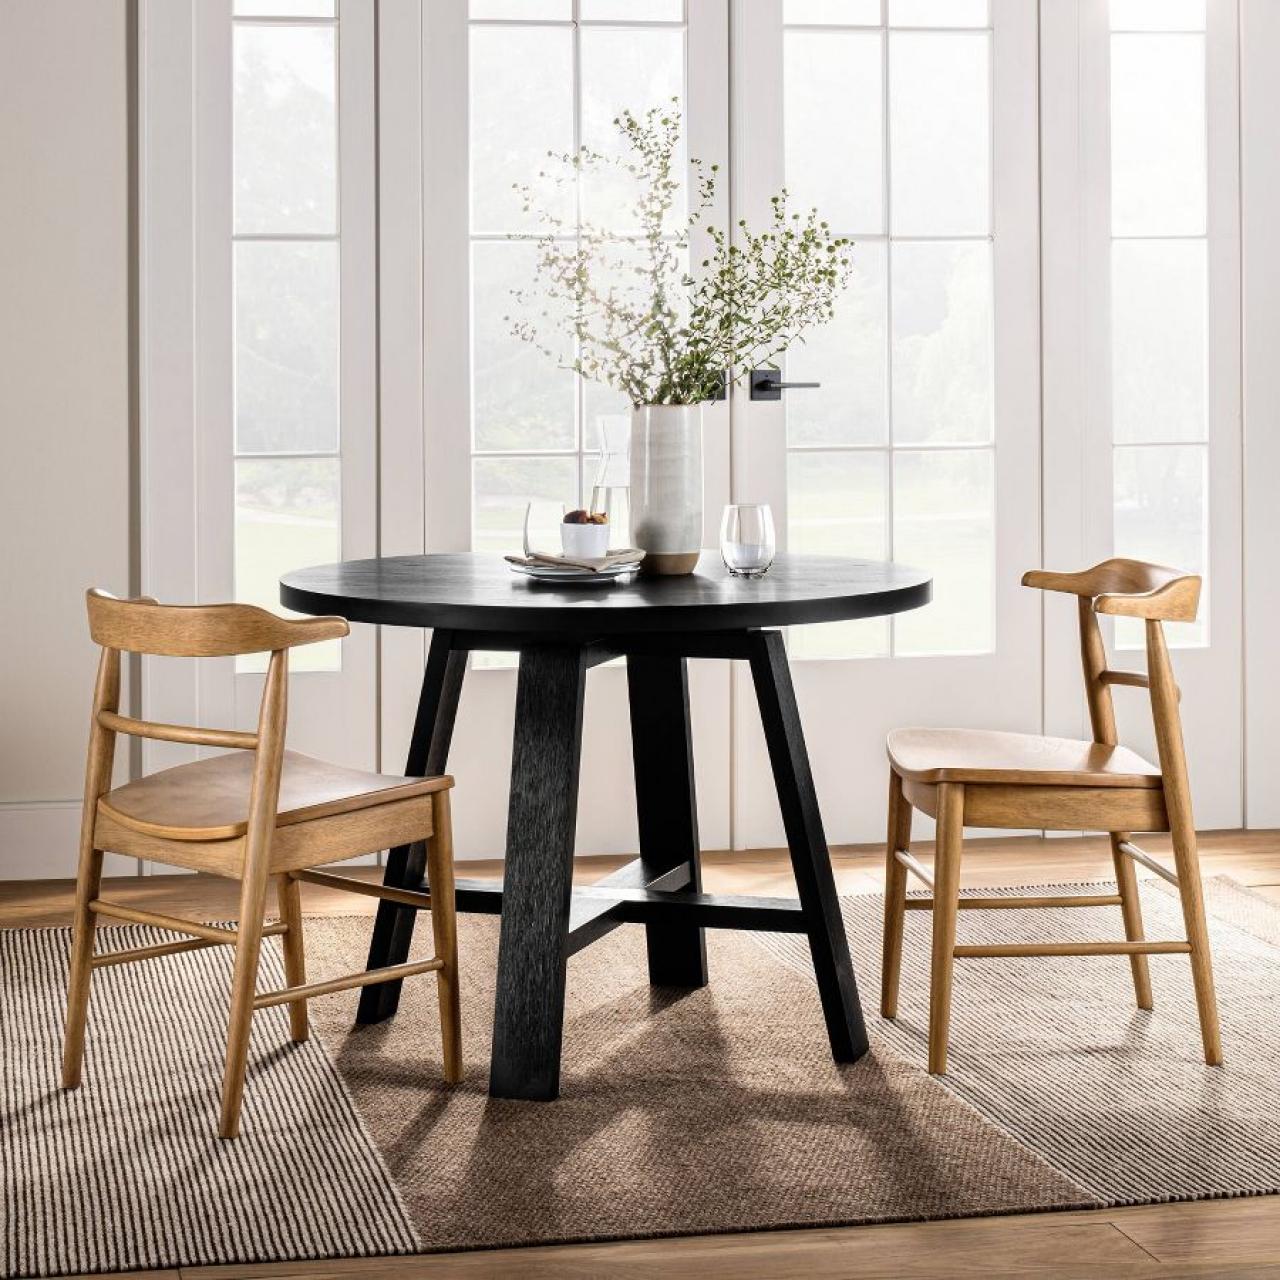 https://hgtvhome.sndimg.com/content/dam/images/hgtv/products/2022/7/28/3/rx_target_linden-round-wood-dining-table.jpeg.rend.hgtvcom.1280.1280.suffix/1659037470907.jpeg